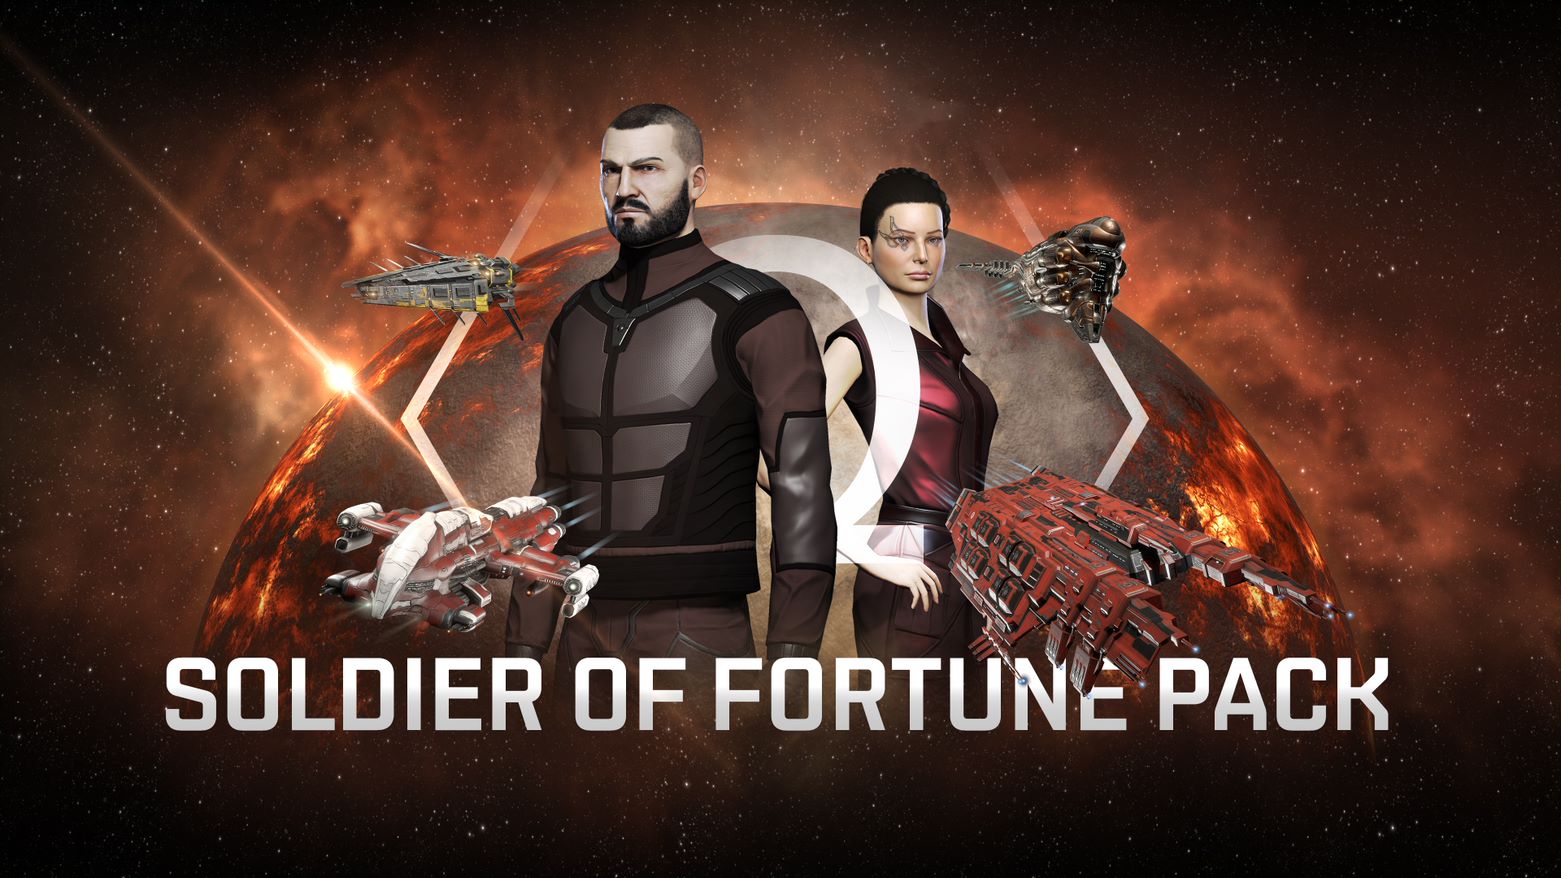 Eve Online Soldier of Fortune Pack